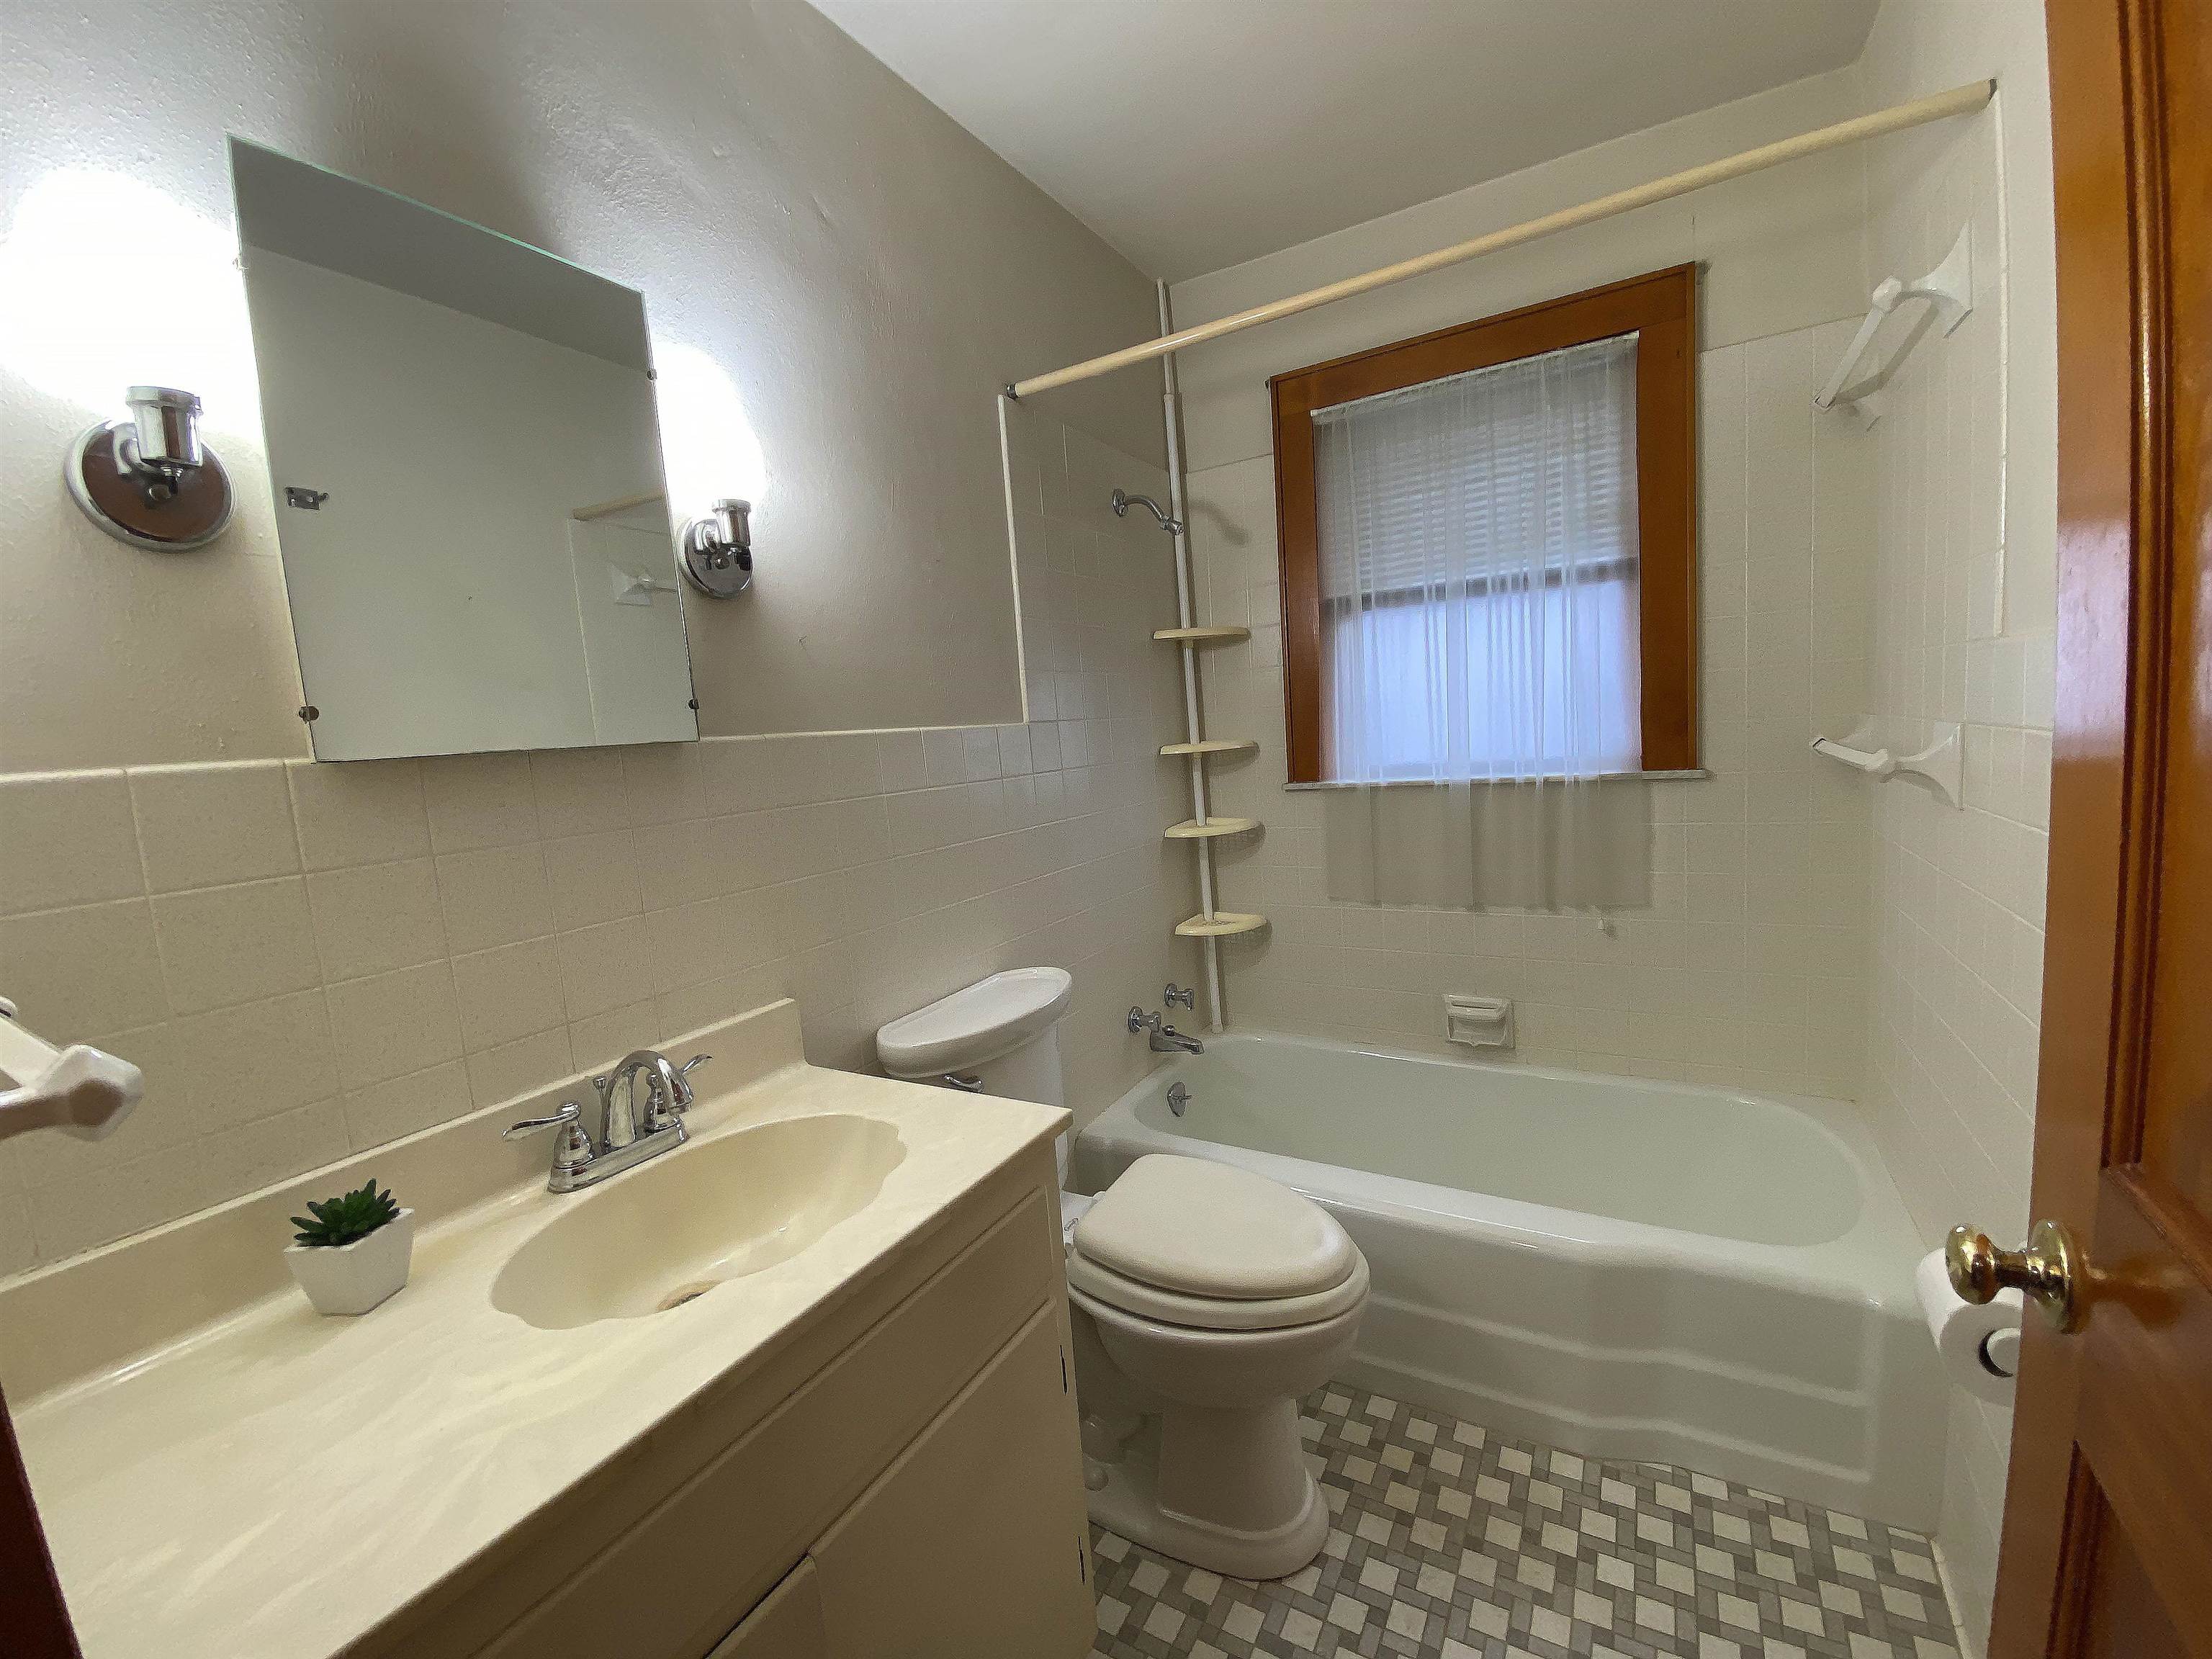 Features tub/shower combo